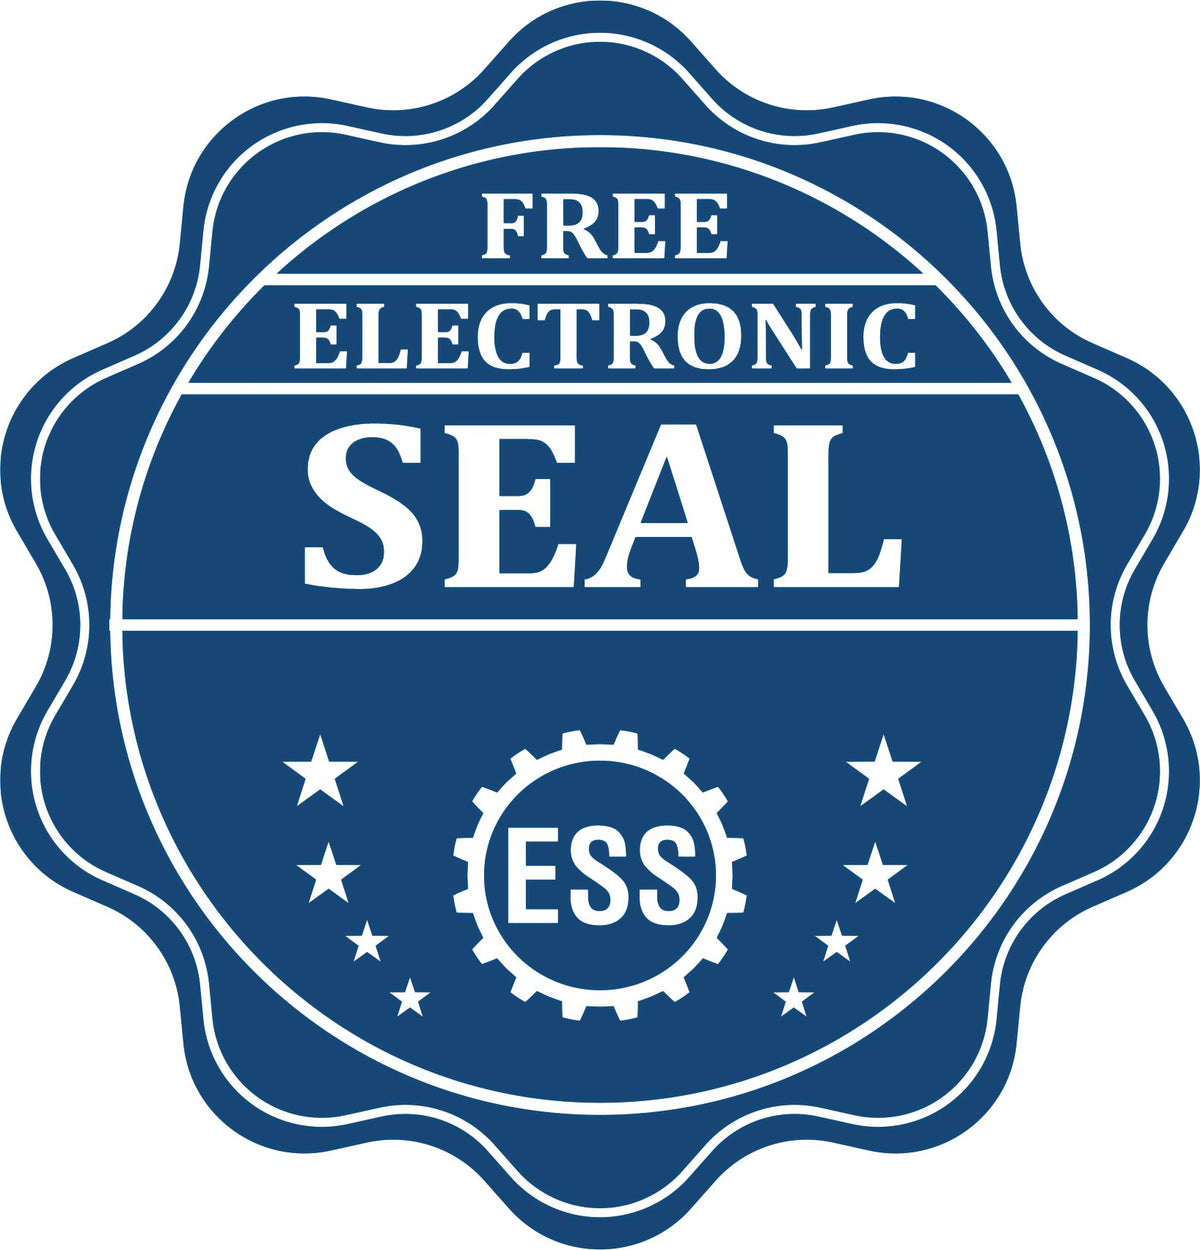 A badge showing a free electronic seal for the Soft Pocket Minnesota Landscape Architect Embosser with stars and the ESS gear on the emblem.